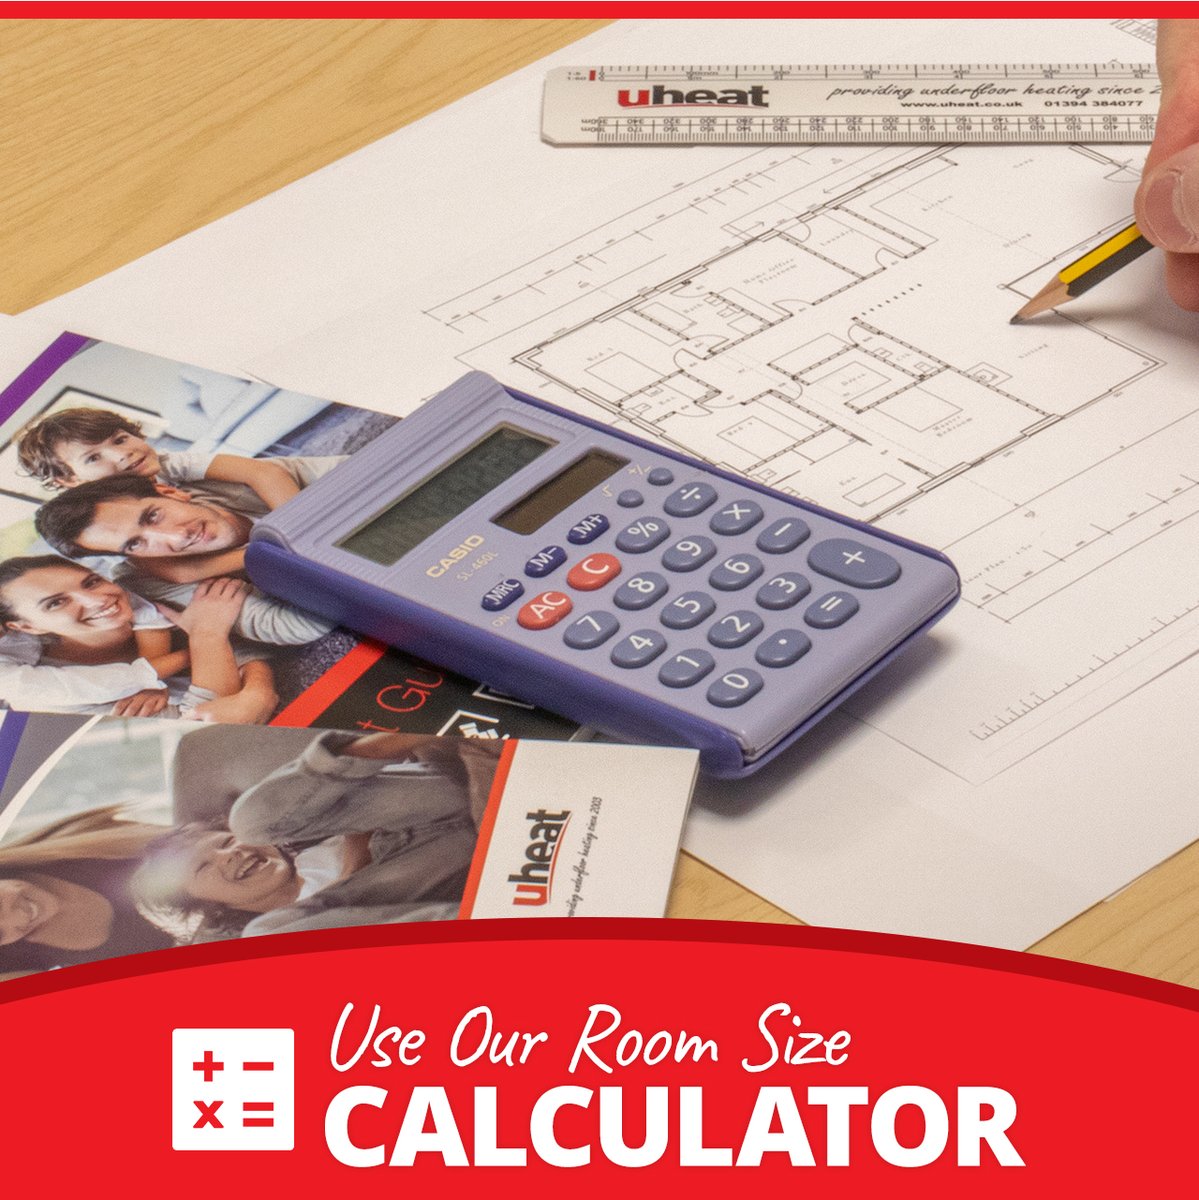 Struggling with your Underfloor Heating setup? 

Our Room Size Calculator has got you covered! 

Calculate your heating area with ease, factoring in fixed furniture. Say goodbye to chilly corners! 🔥

#underfloorheating #roomsizecalculator #heatingsolutions #plumbing